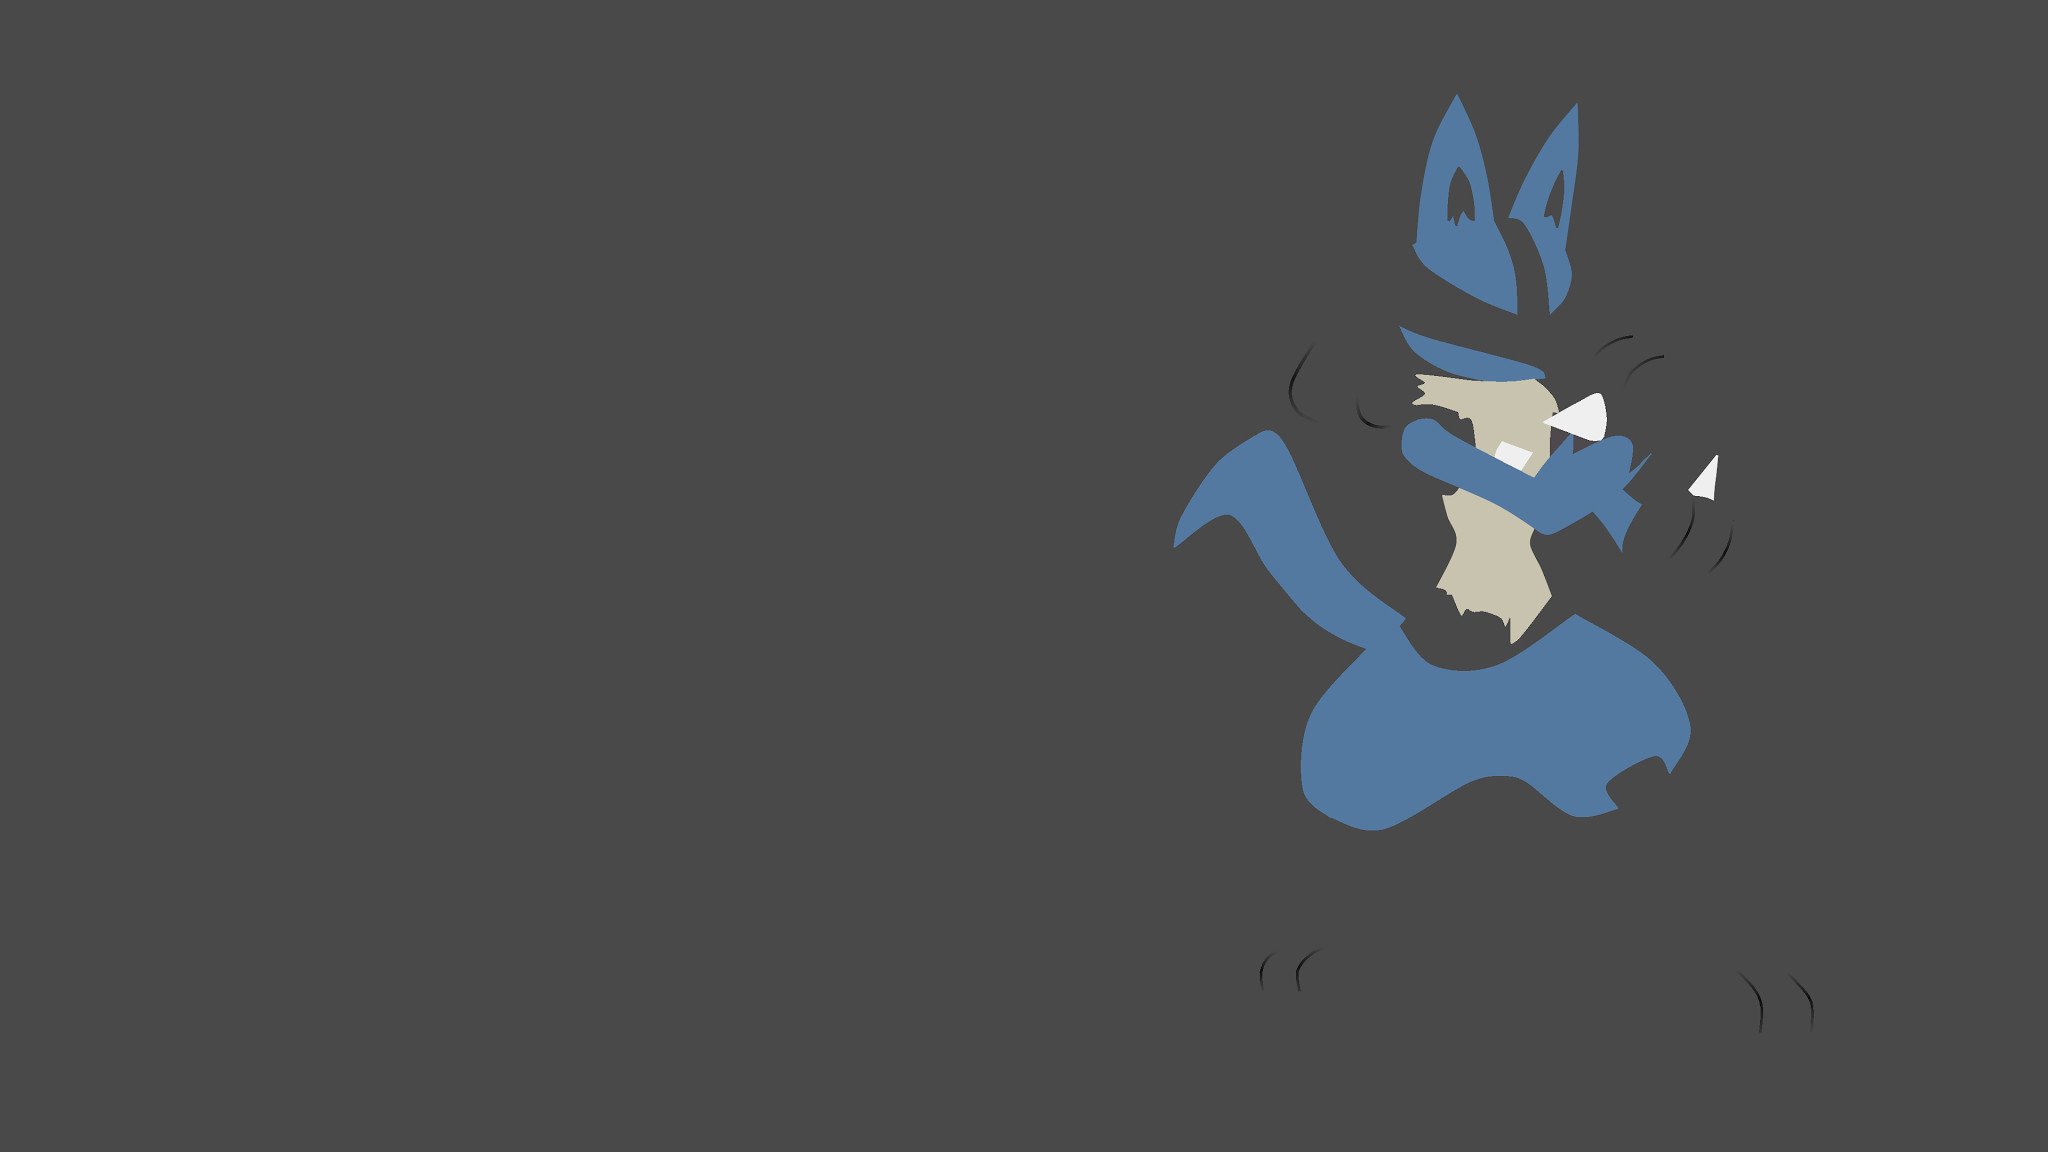 2048x1152 Here is a Lucario Minimalist Wallpaper I made... Go ahead and download it  by .